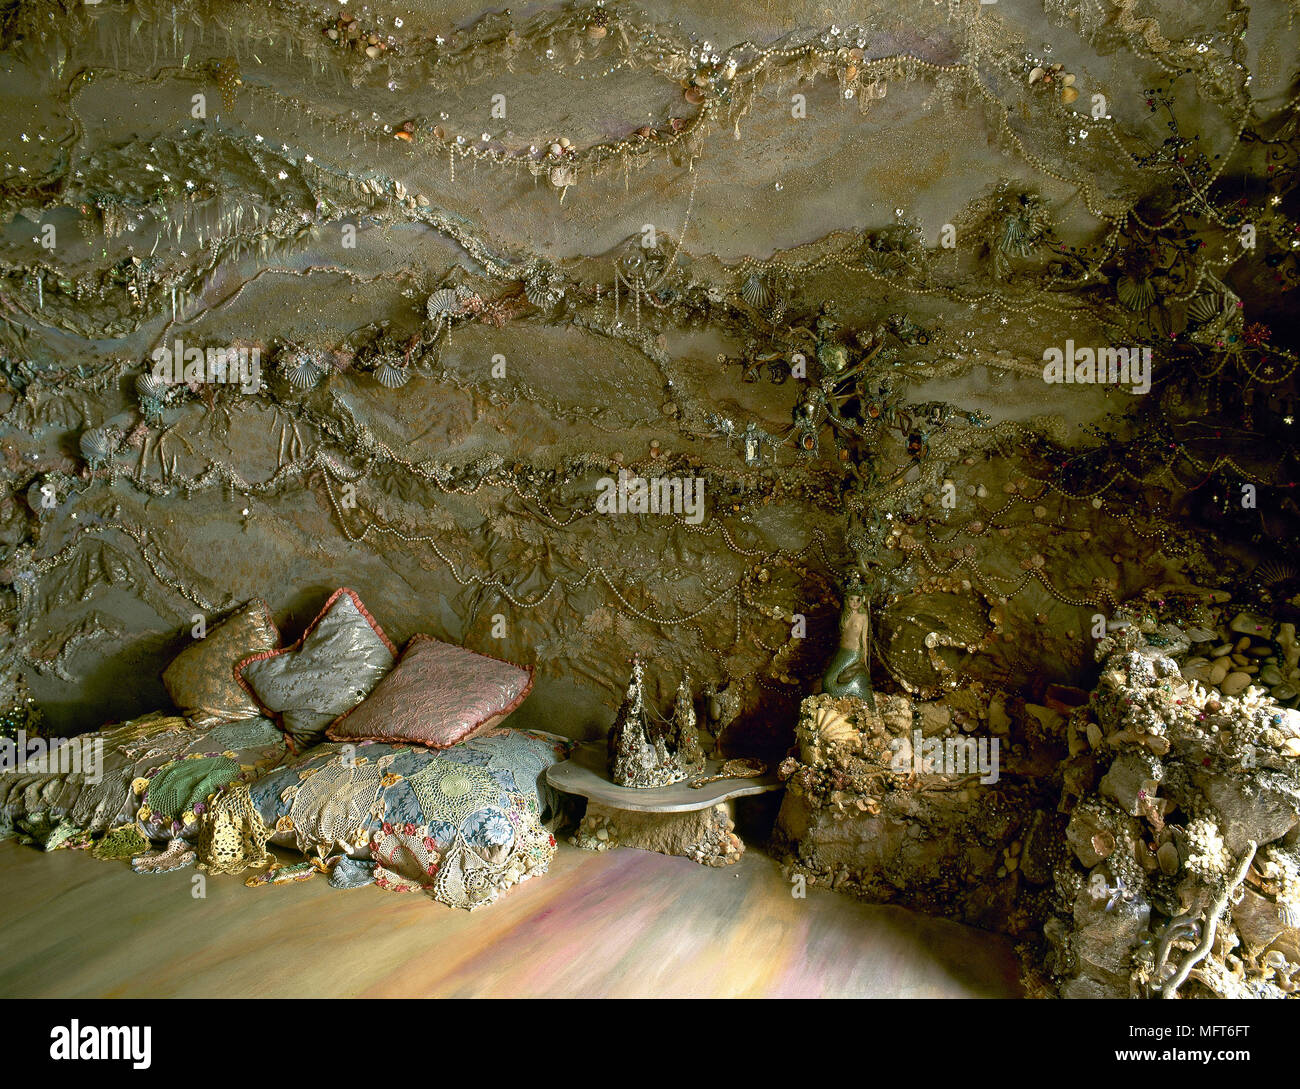 Pearlescent cushions on the floor of a grotto. Stock Photo